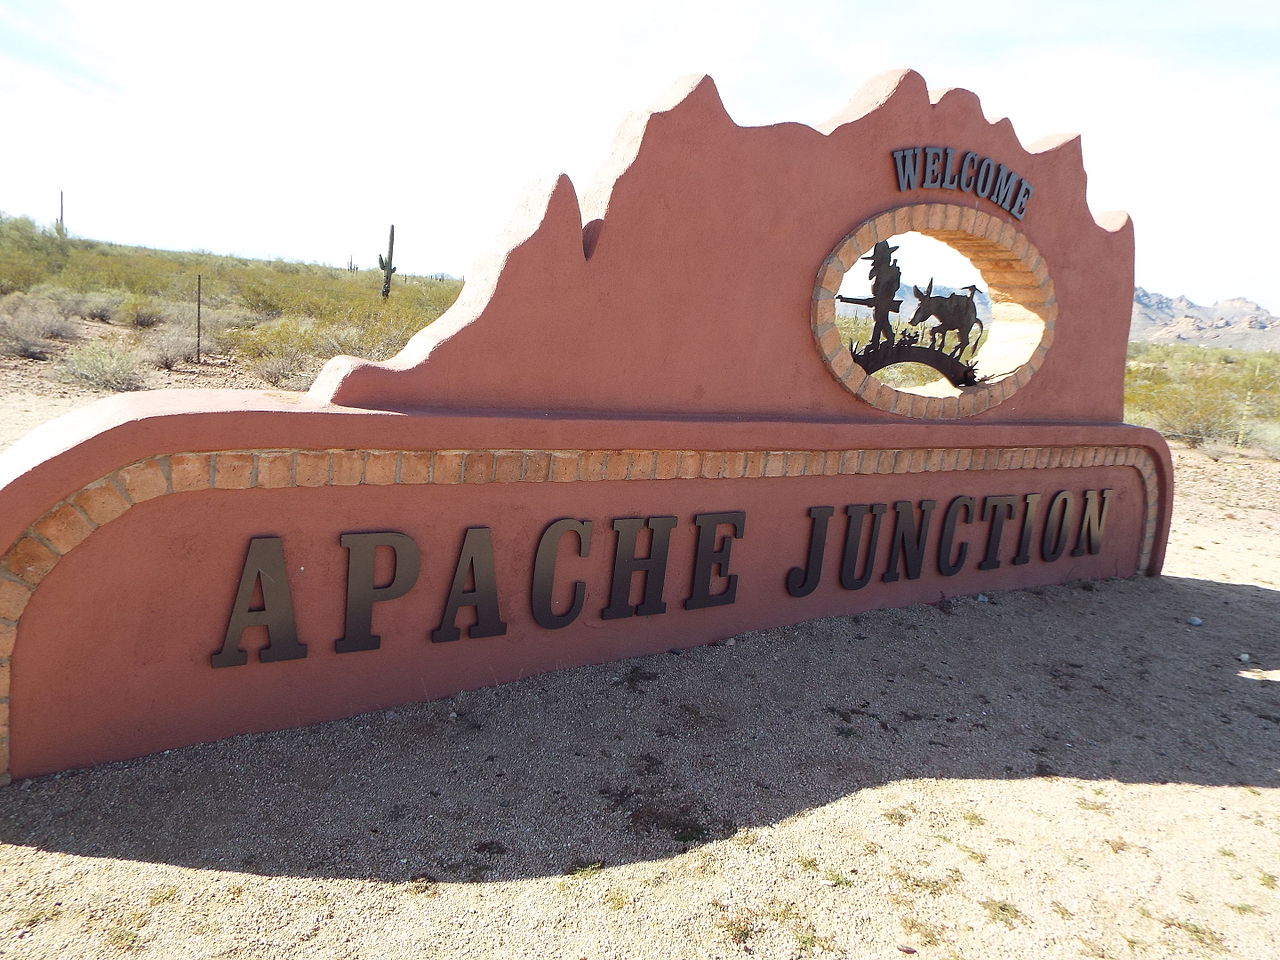 1280px-Apache_Junction-welcome_to_Apache_Junction-1.JPG